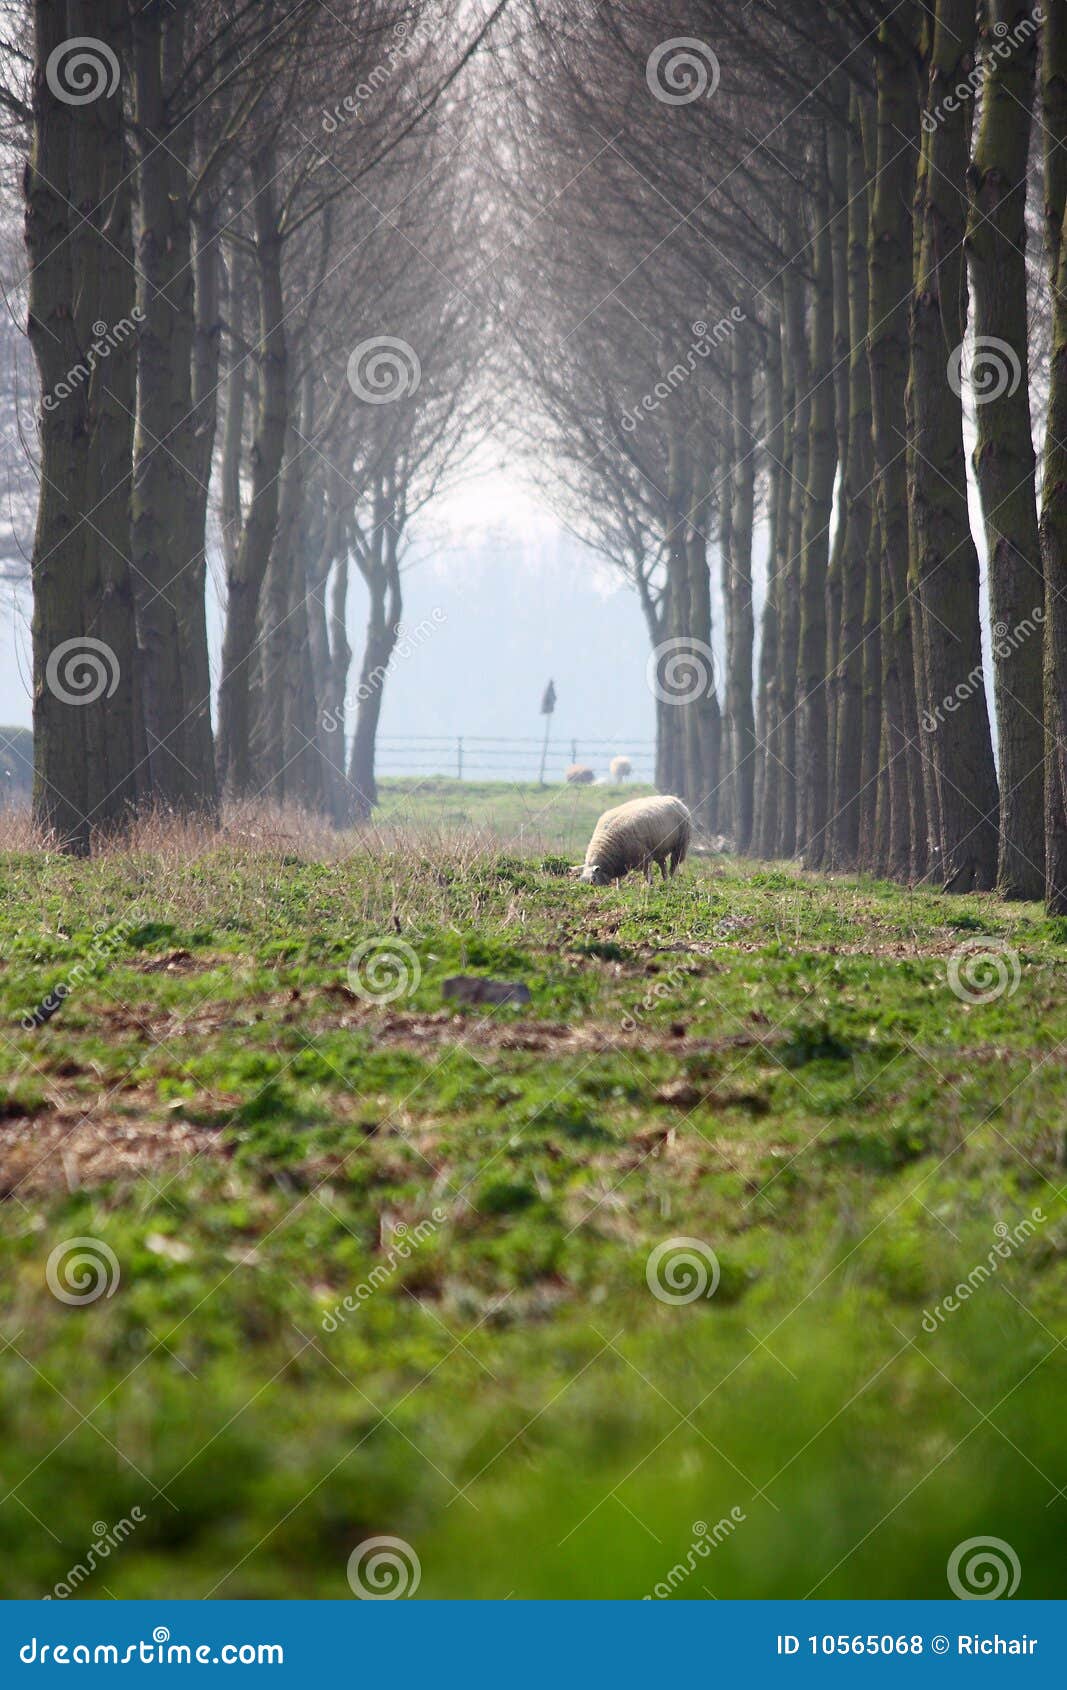 sheep and canopy